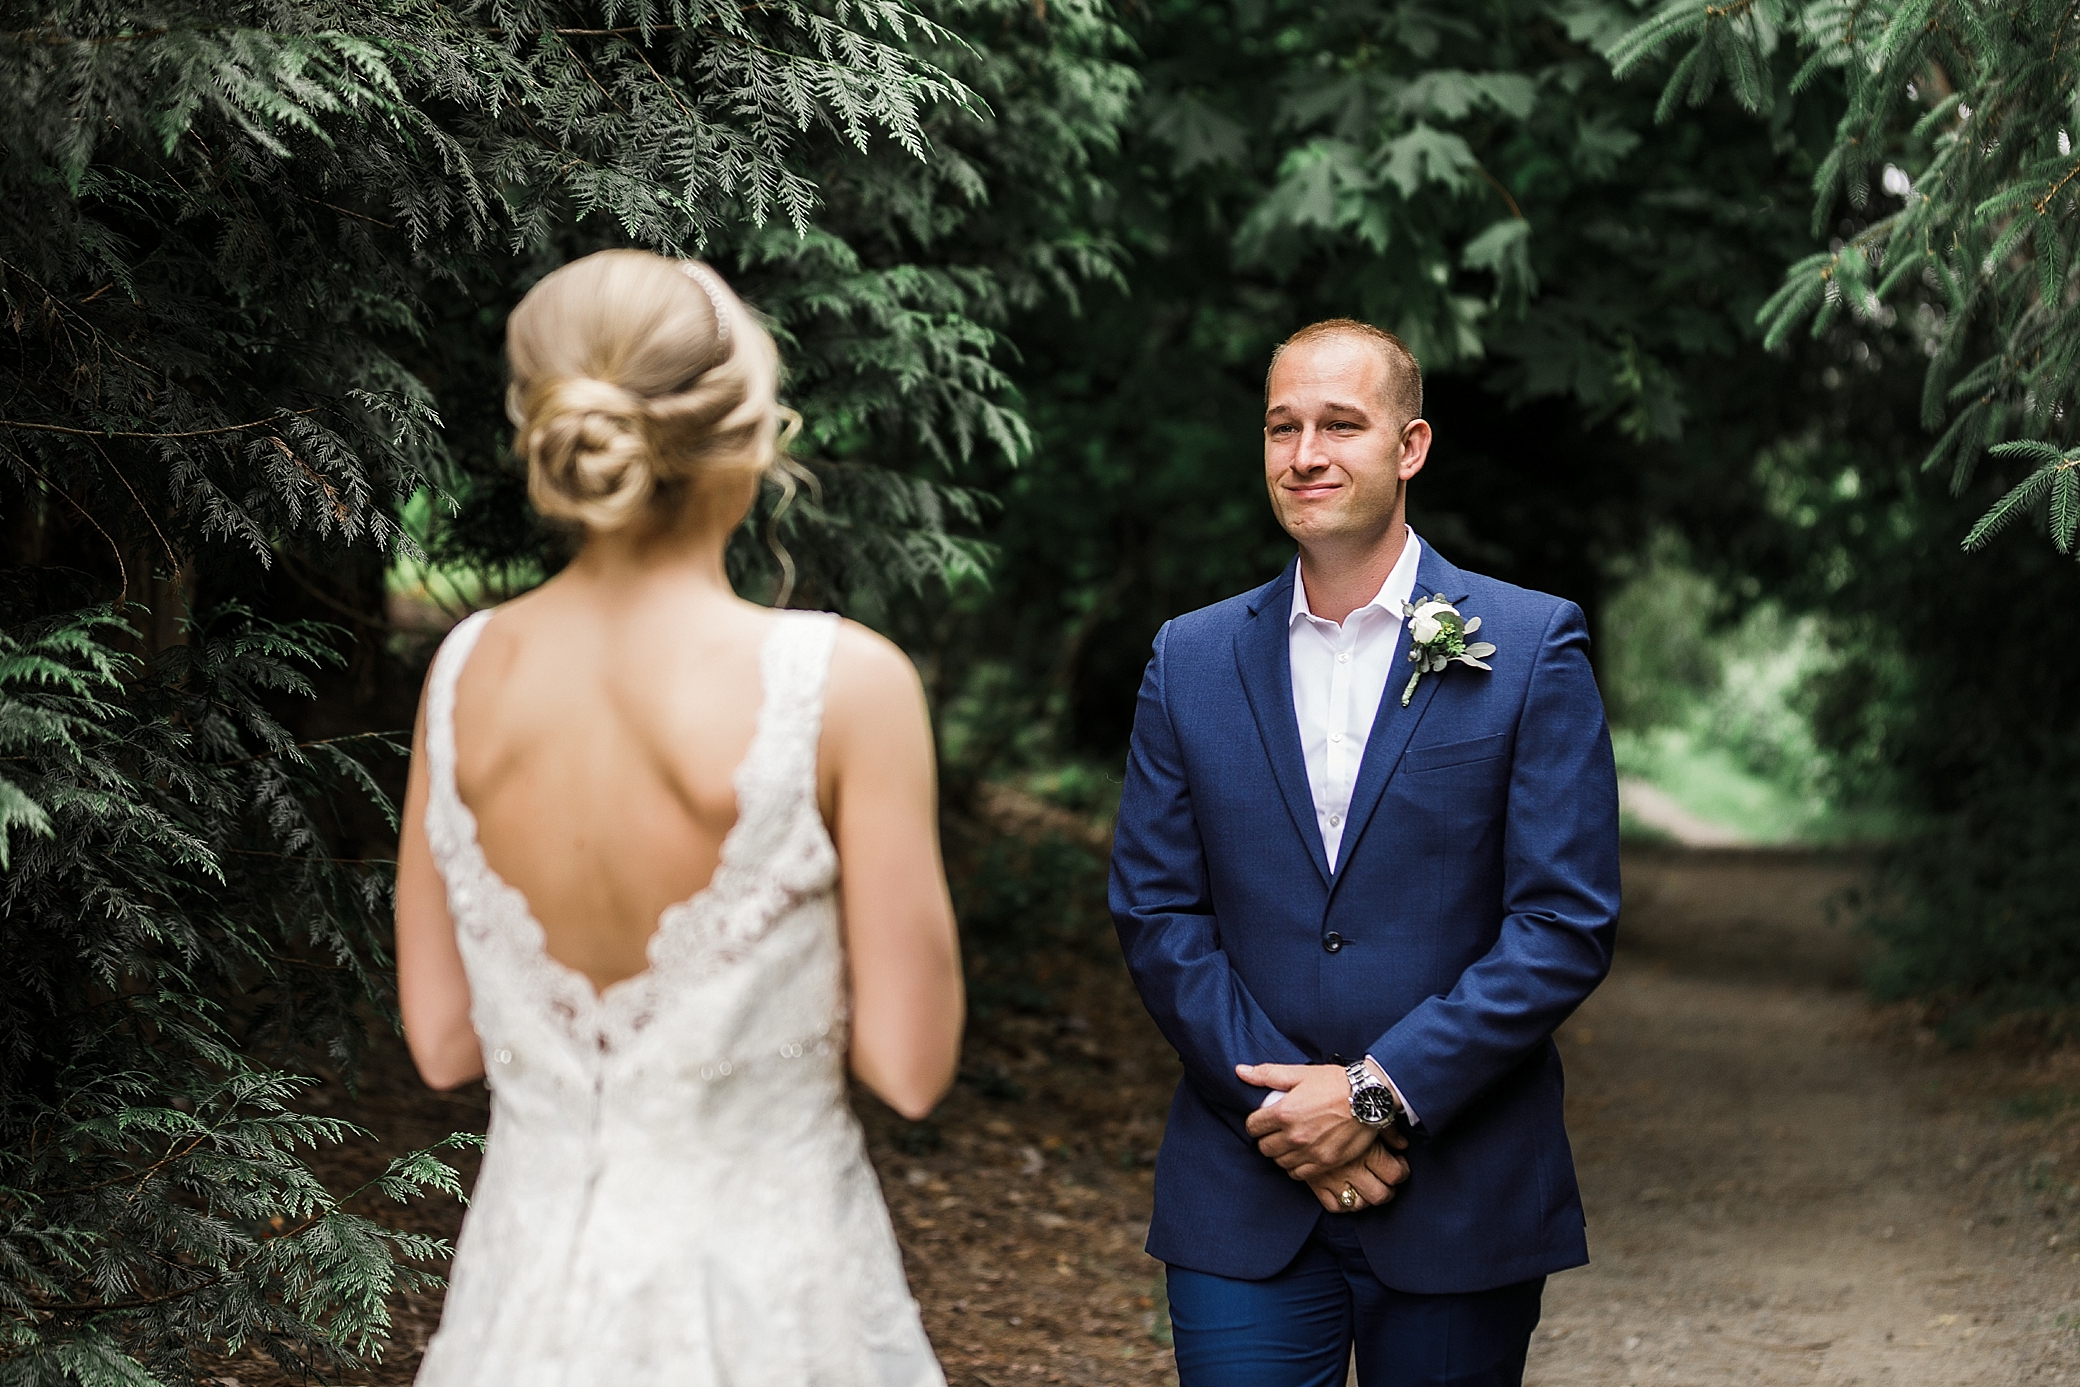 Emotional first look between bride and groom photographed by Woodinville Wedding Photography, Megan Montalvo Photography 